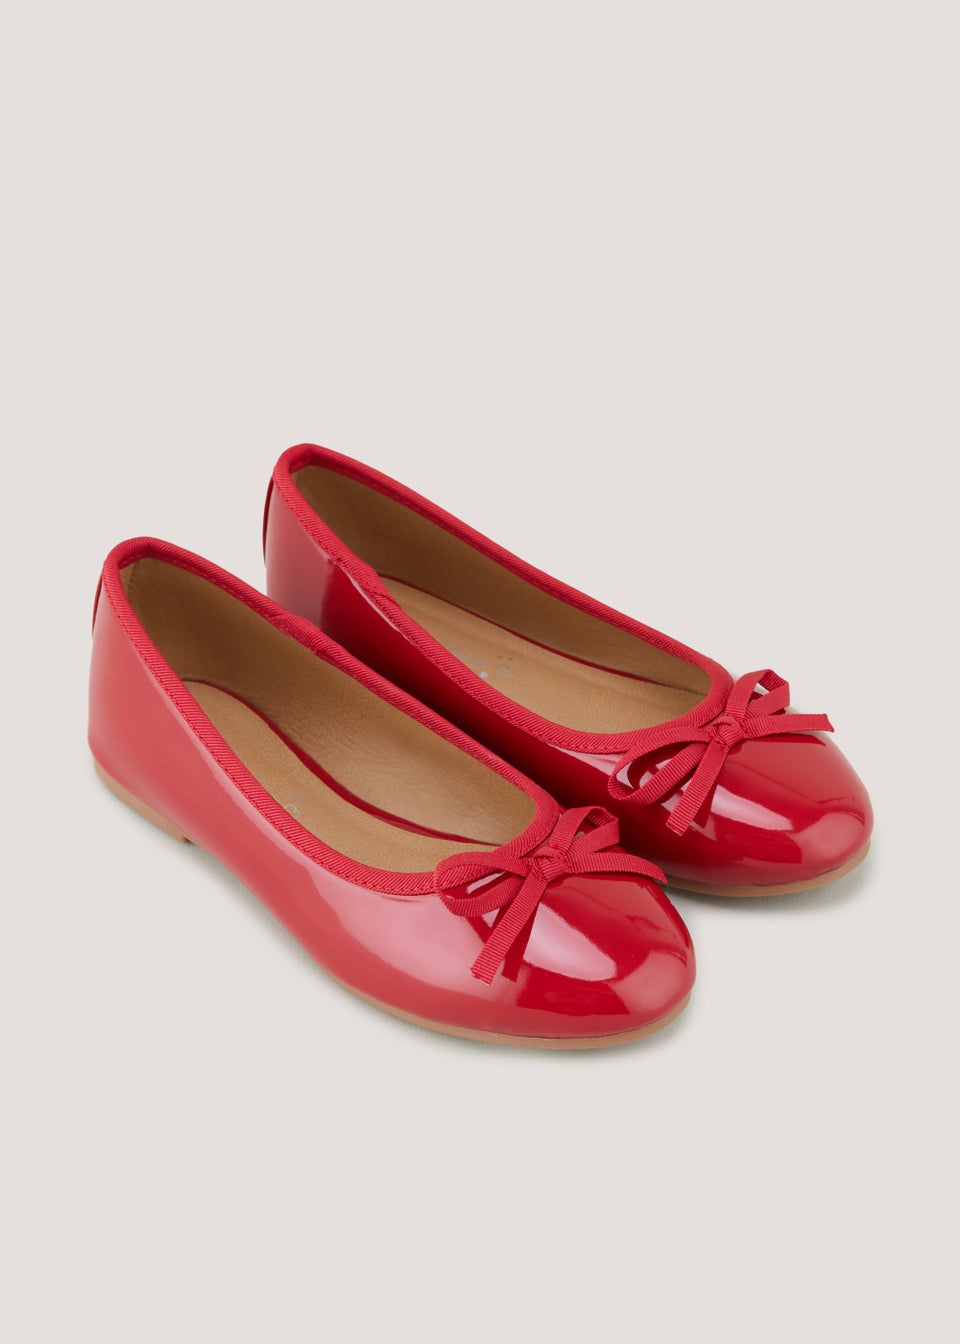 Girls Red Patent Bow Ballet Shoes (Younger 12-Older 5)